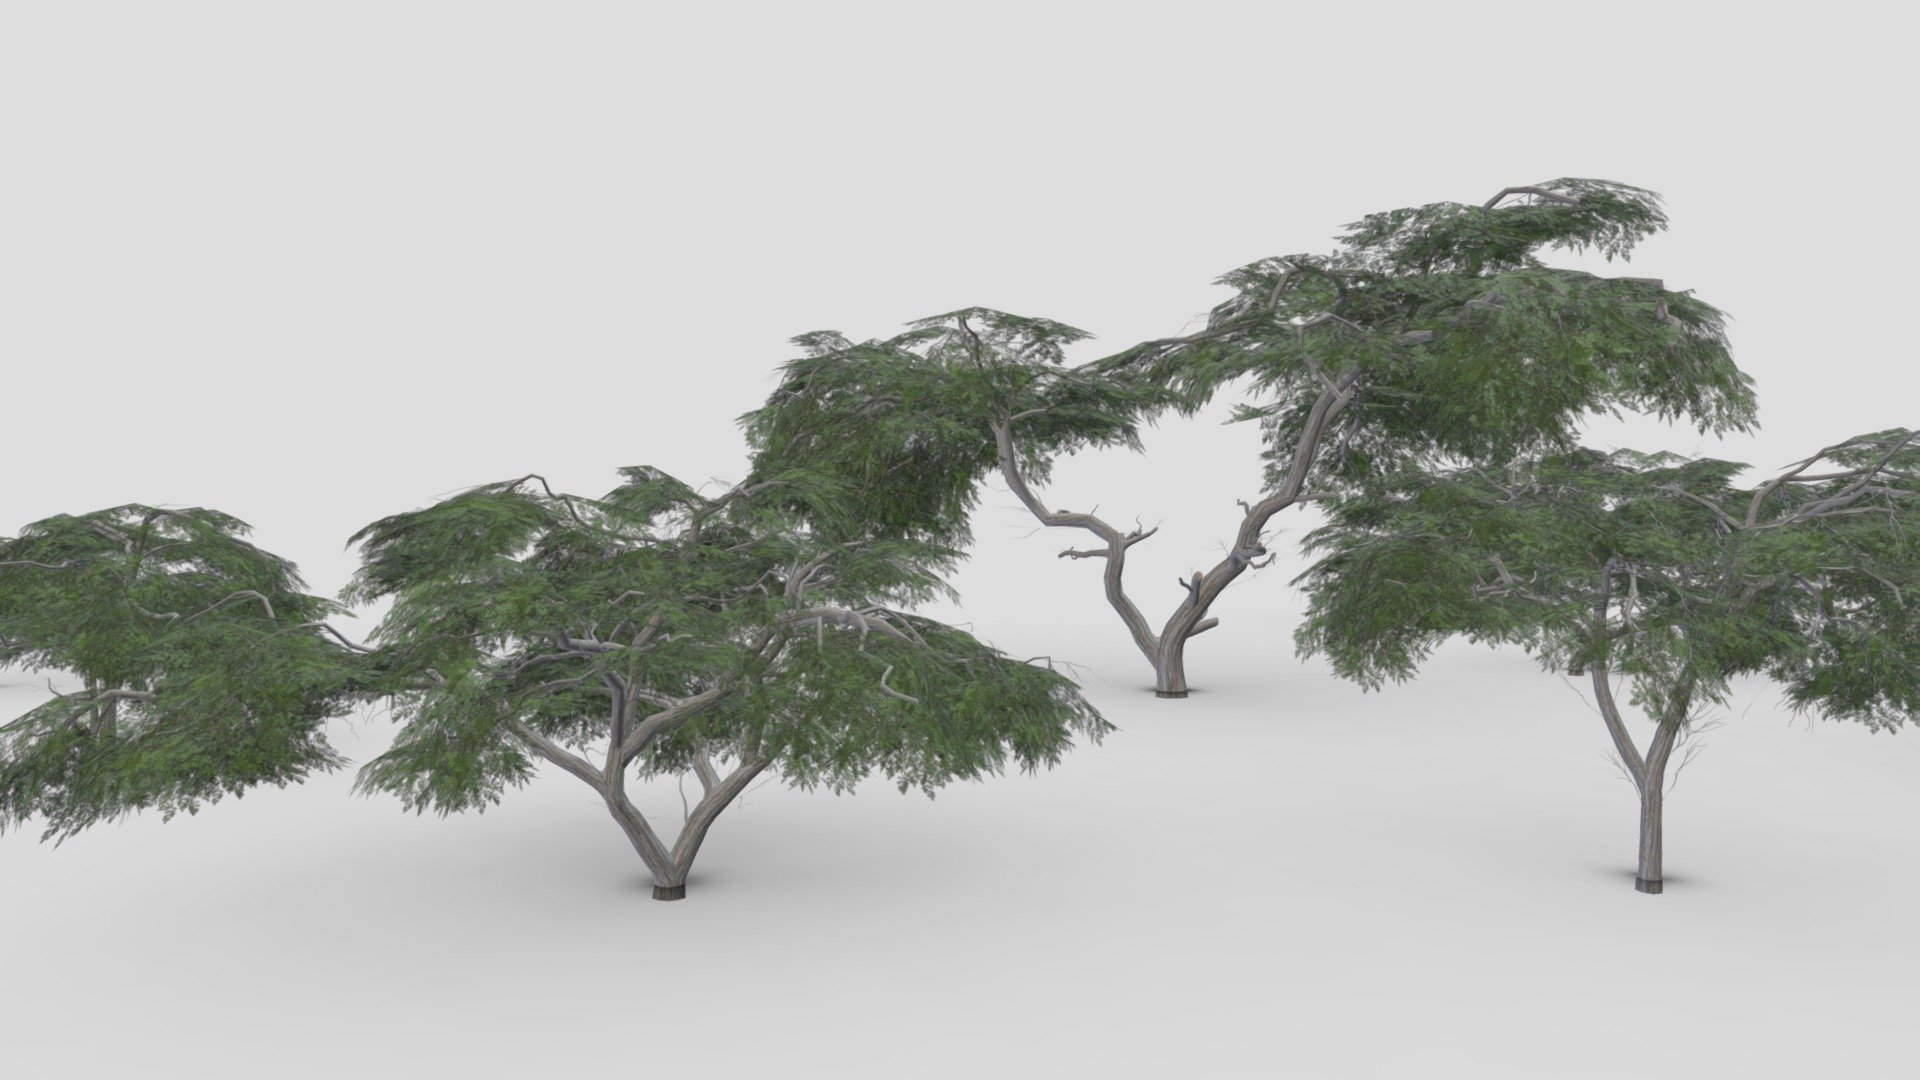 I tried to work on Acacia Tree 3D model. This is a 3D low poly pack of Acacia Tree. This 3D low poly collection contains 12 3D models of Acacia Tree 3d model